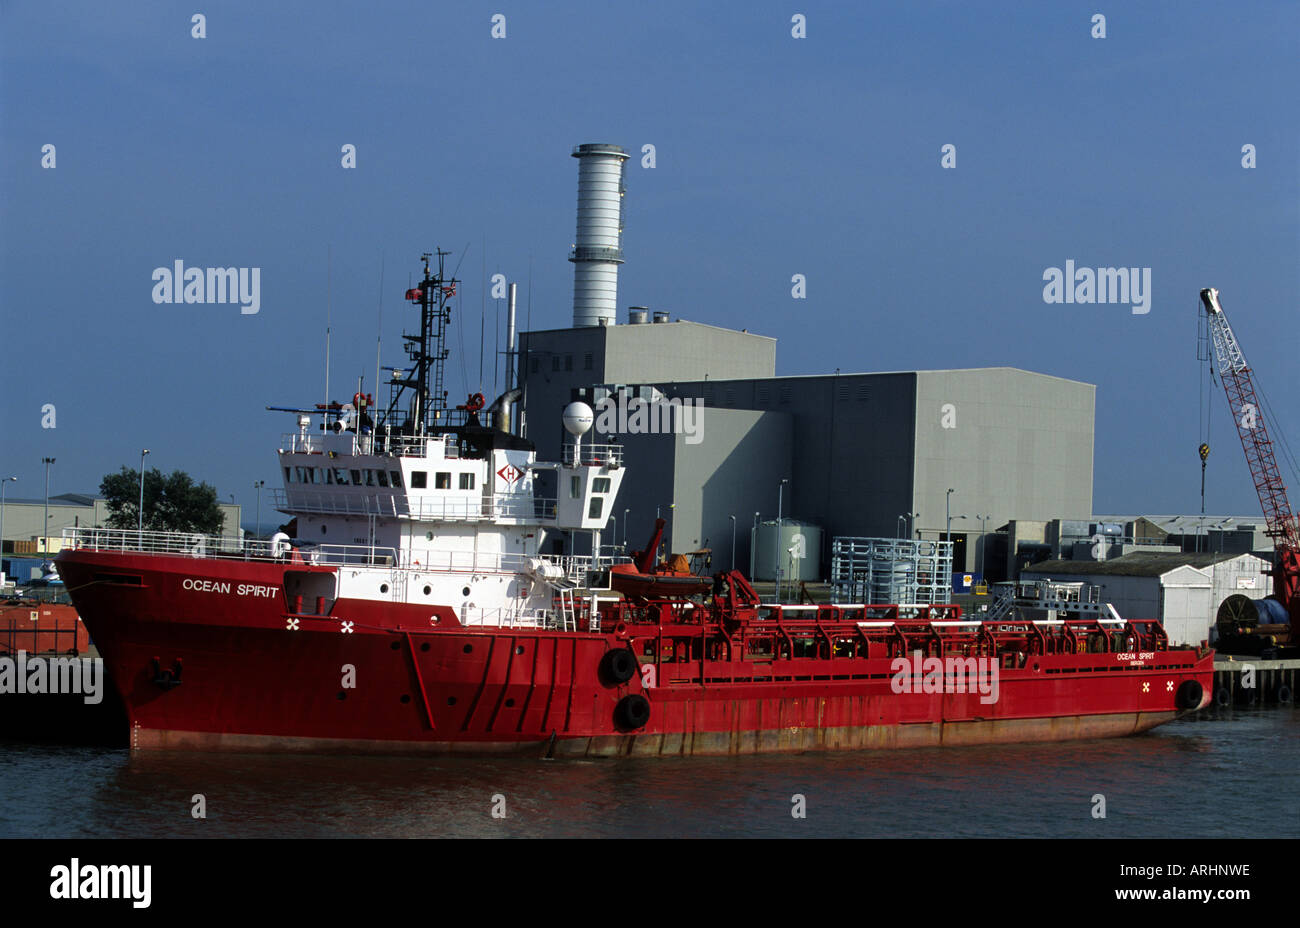 North Sea supply vessel 'Ocean Sprit' beside a gas-fired power station at the Port of Great Yarmouth, Norfolk, UK. Stock Photo